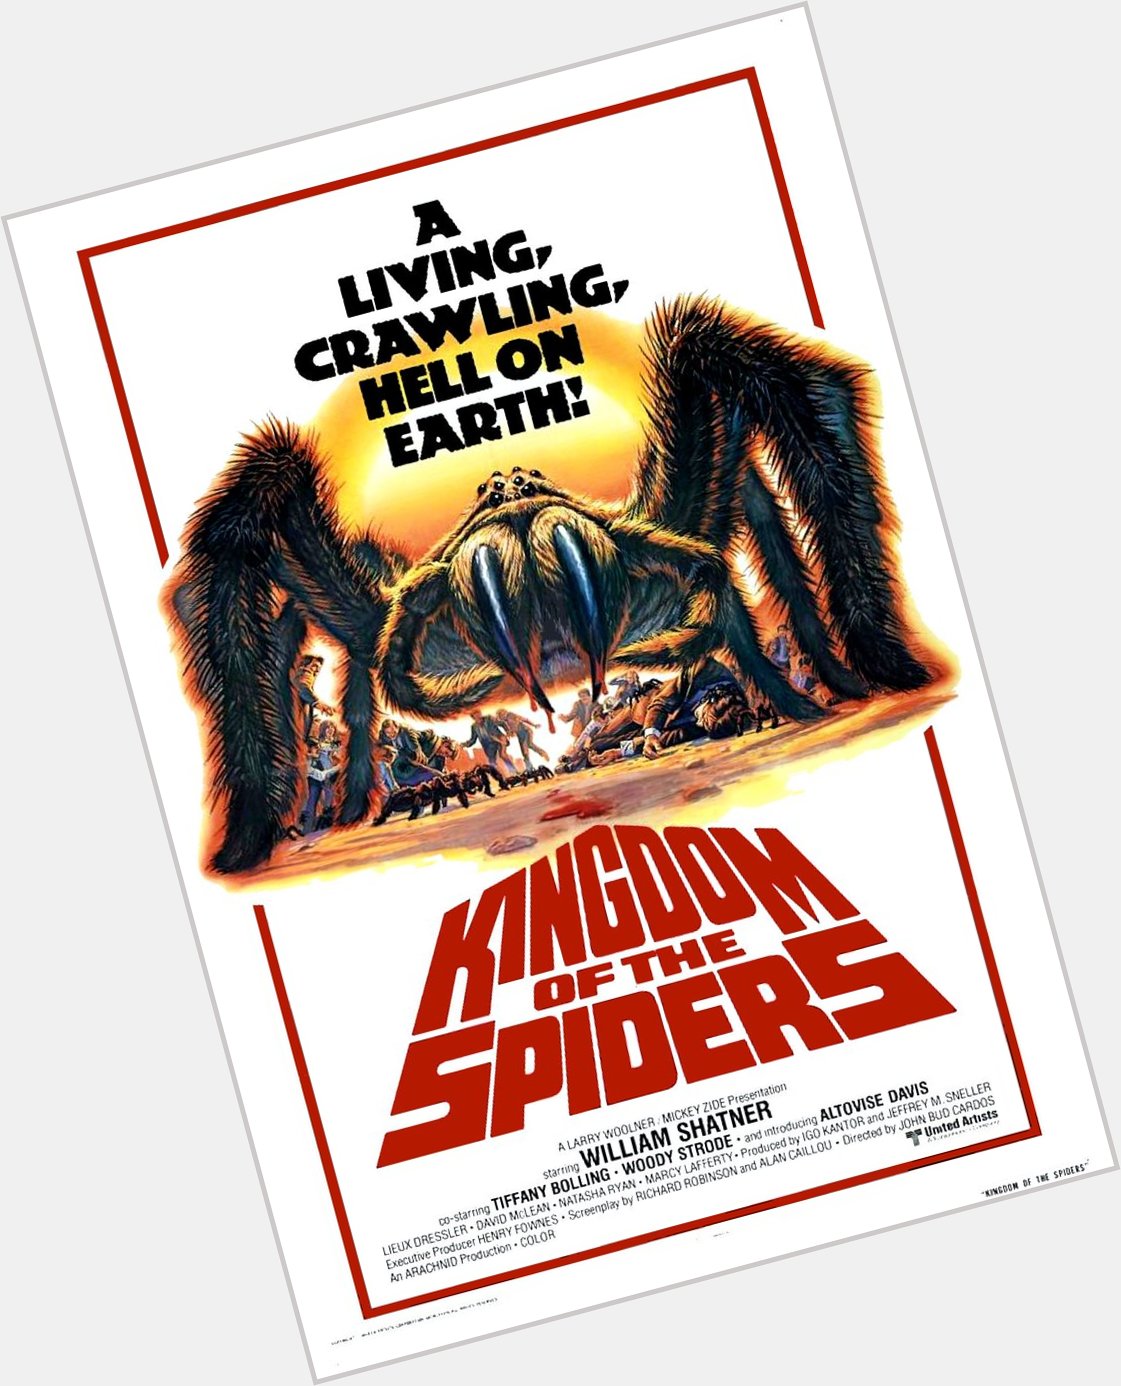 Happy 88th birthday to William Shatner. Not a big Star Trek fan but love me some KINGDOM OF THE SPIDERS(1977). 